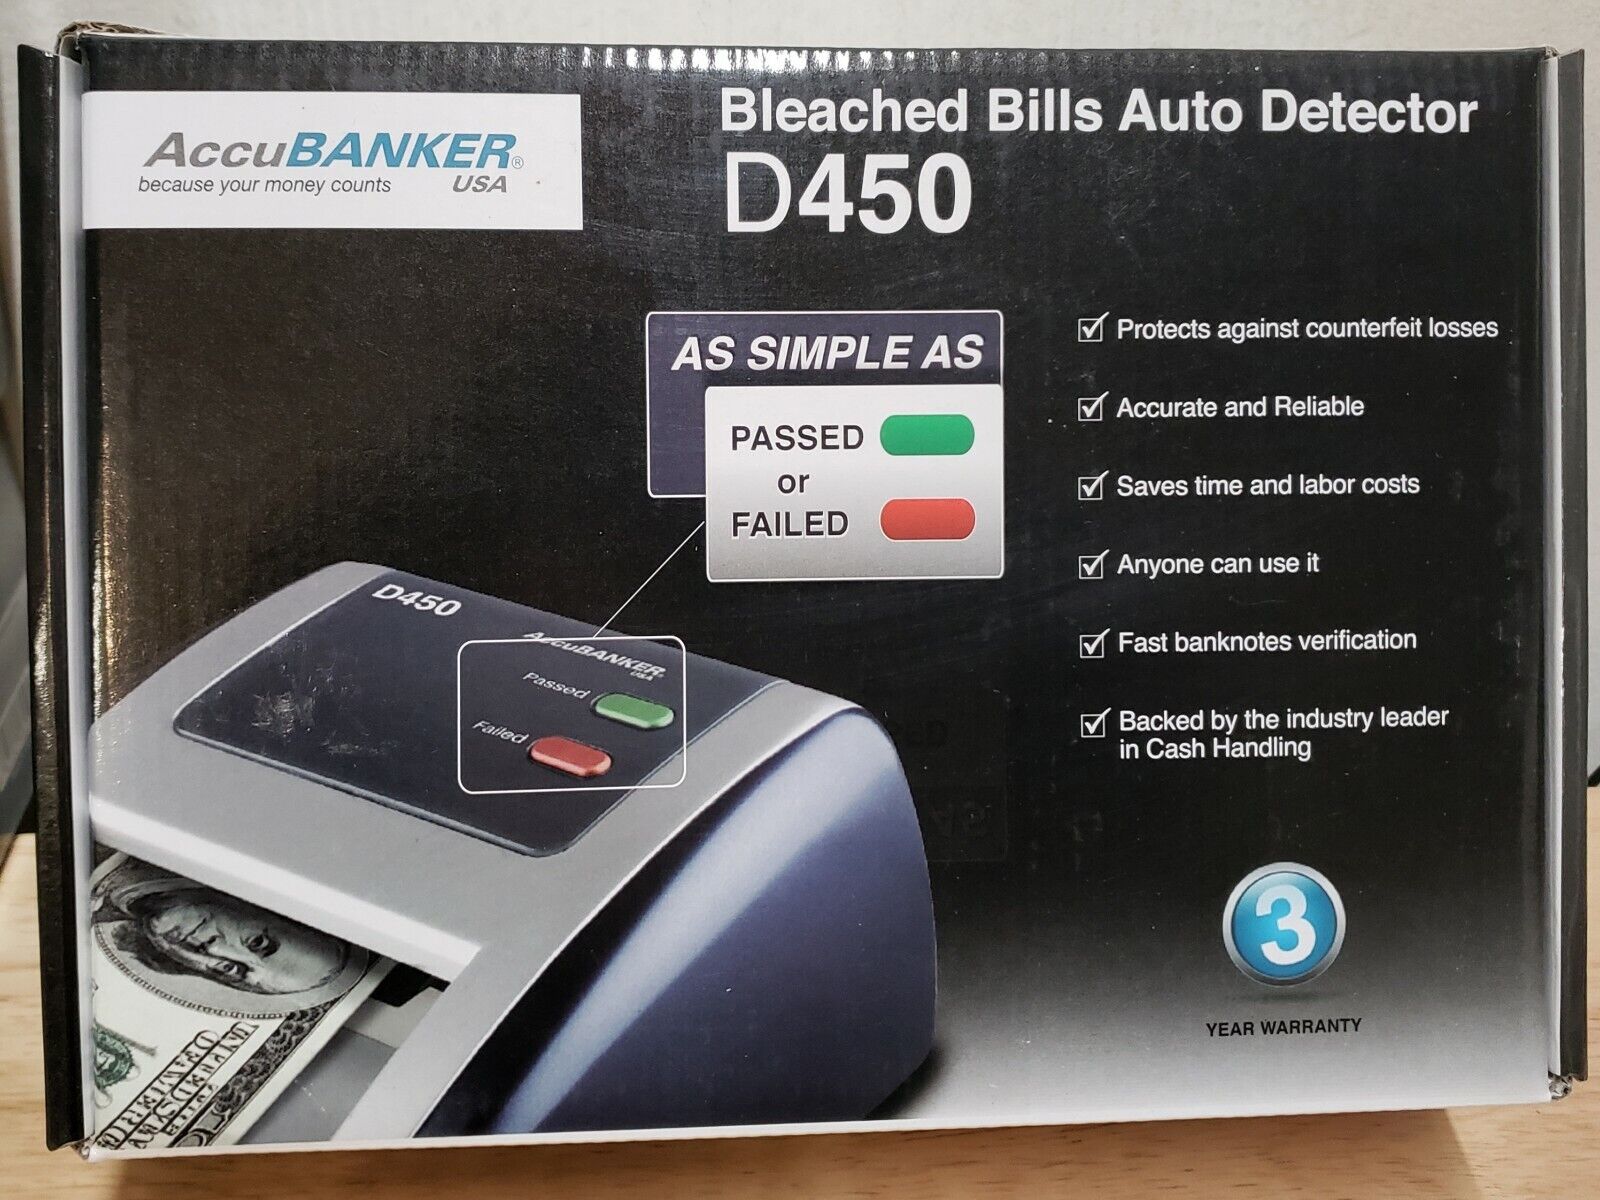 AccuBanker D450 Counterfeit Bill Bleached Outlet Luxury goods SALE RED Detector